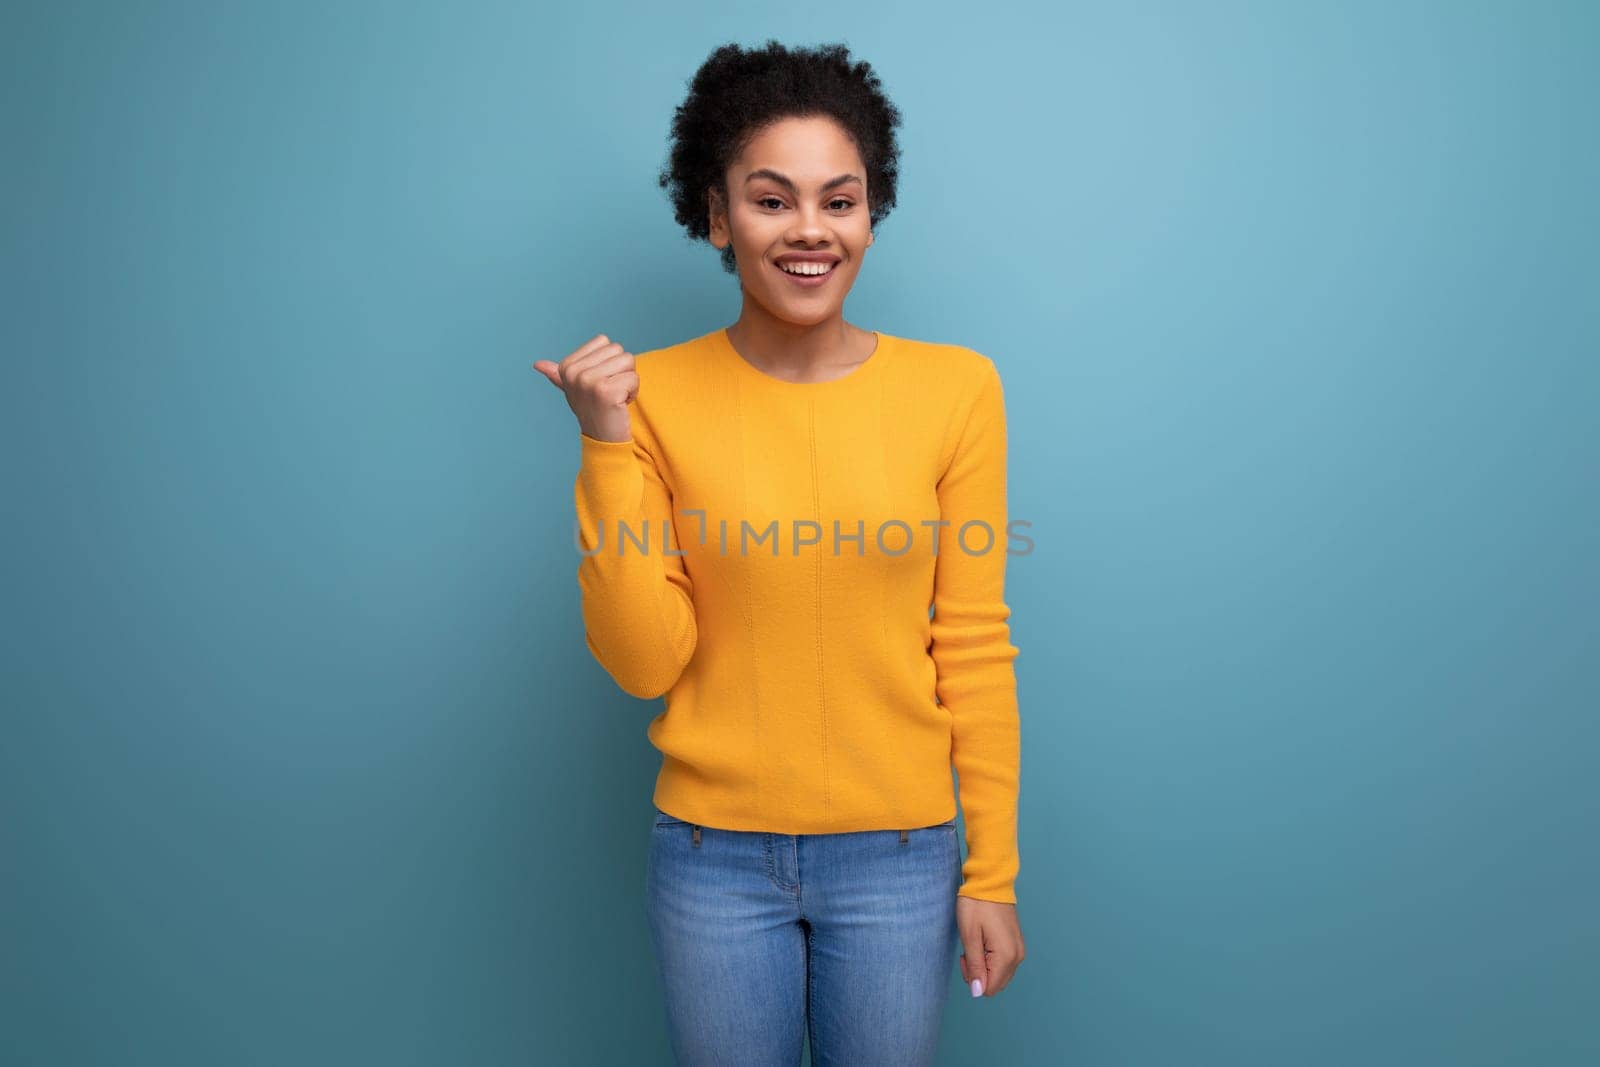 joyful young hispanic woman with black curly hair in a yellow jacket on a blue background.